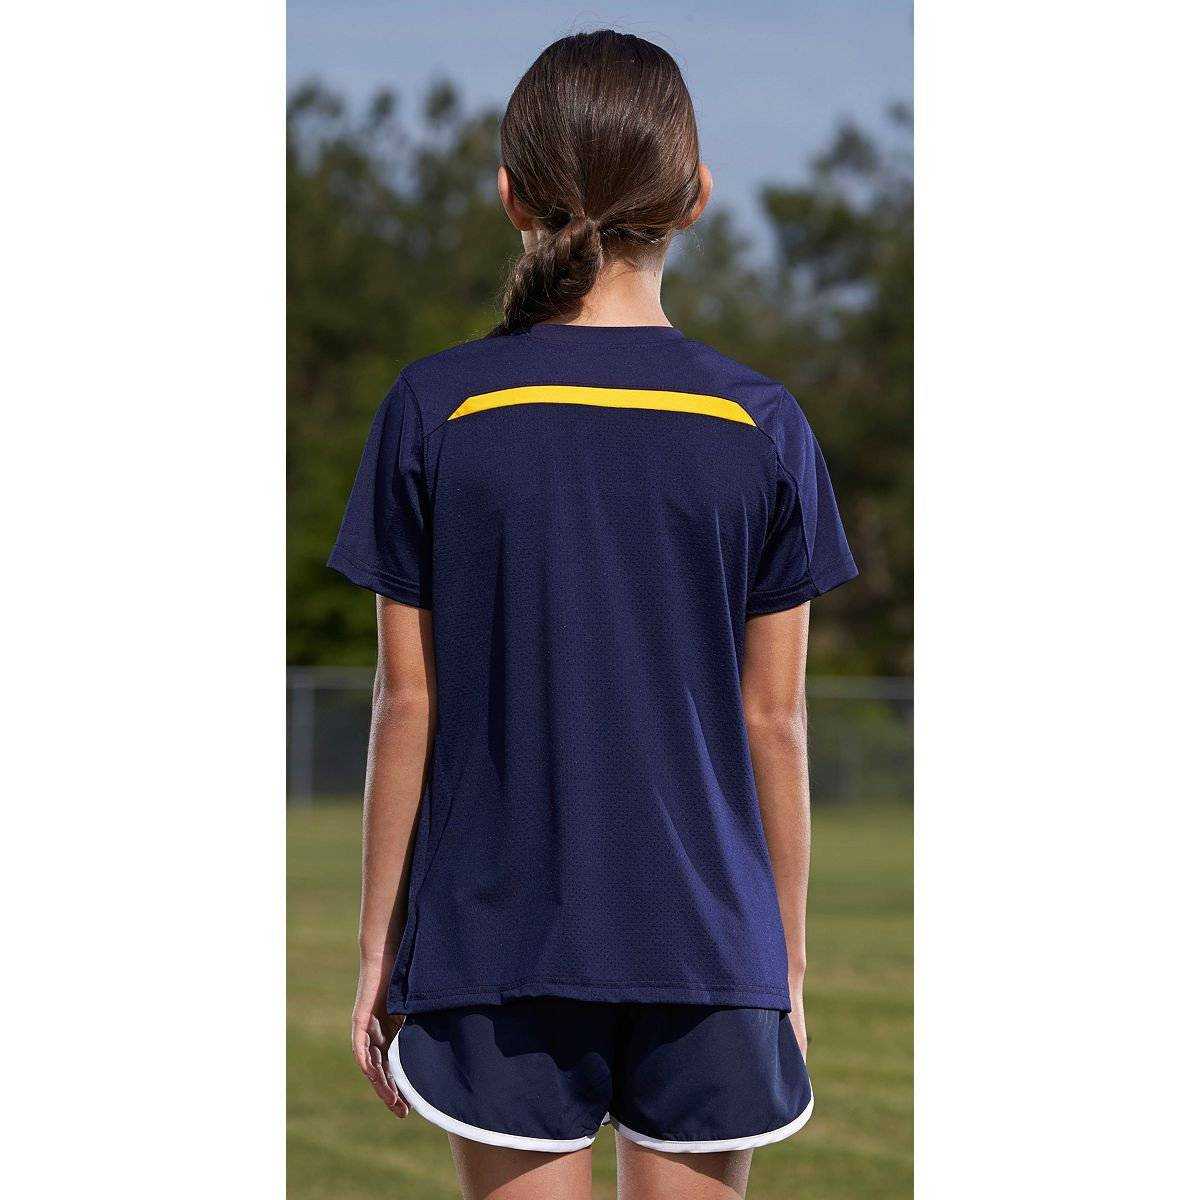 Augusta 1003 Girls Avail Jersey - Navy Gold - HIT a Double